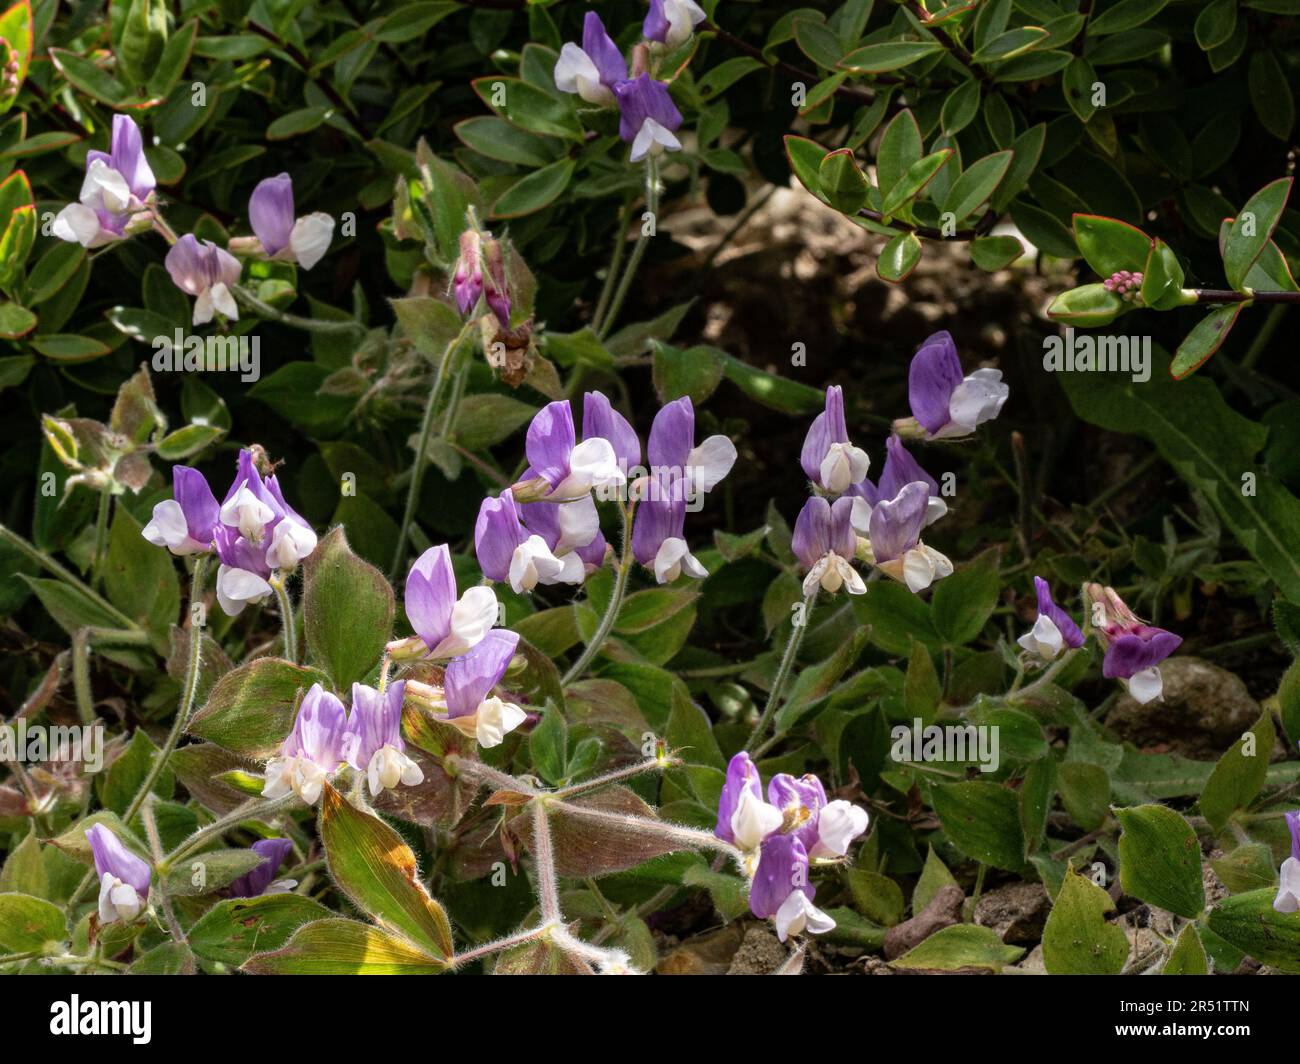 The violet and white flowers of the prostrate sweet pea Lathyrus laxiflorus Stock Photo